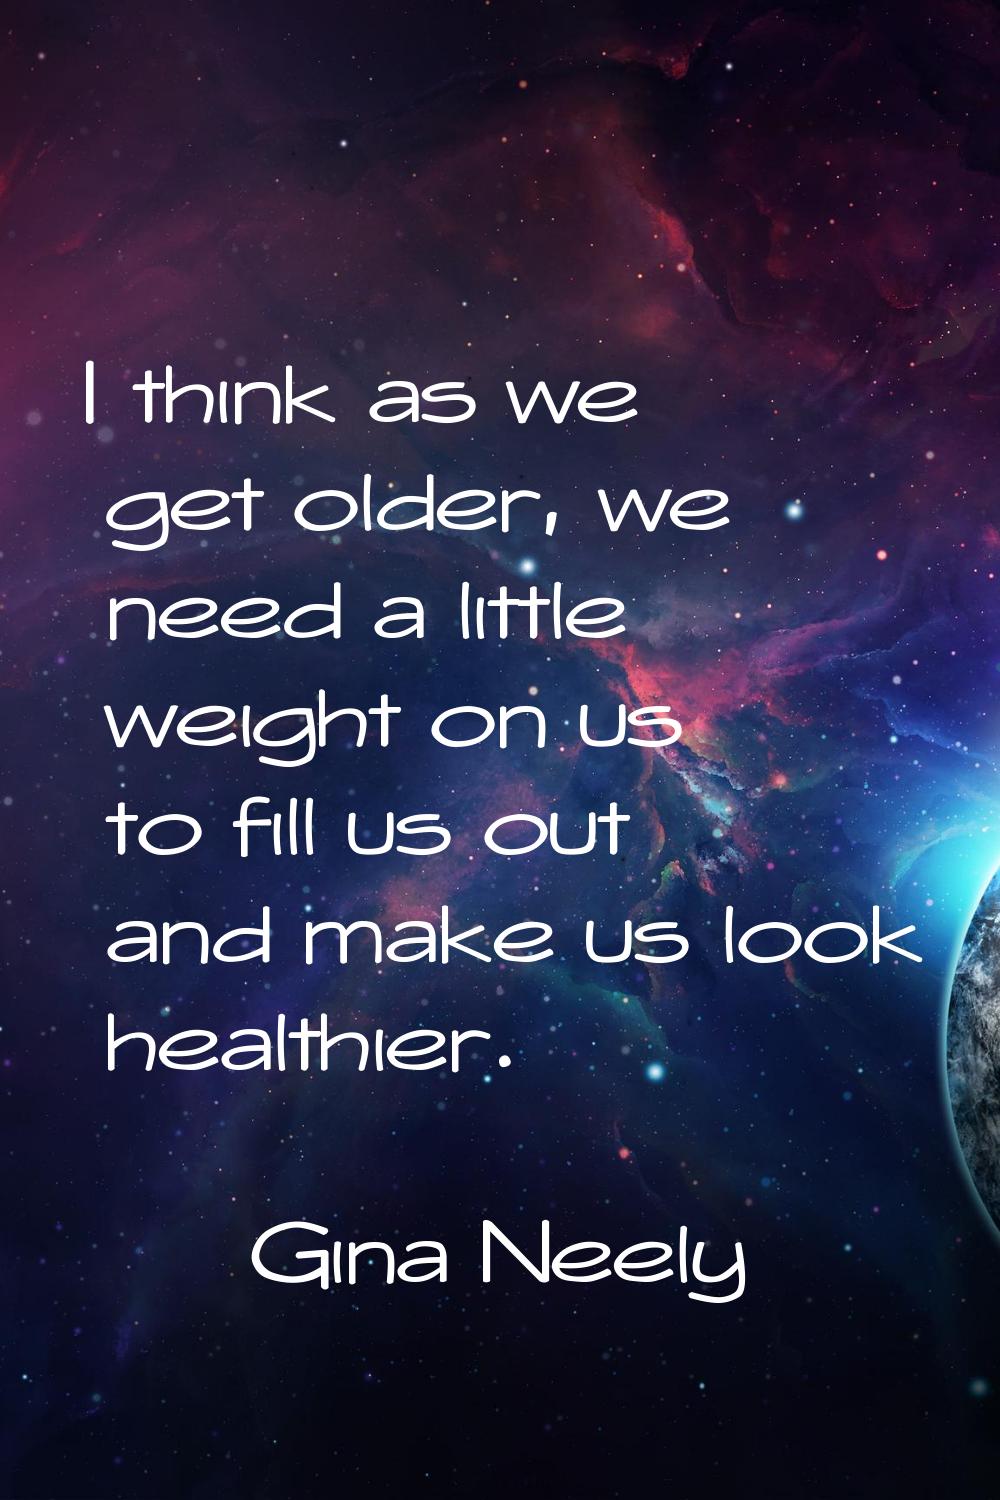 I think as we get older, we need a little weight on us to fill us out and make us look healthier.